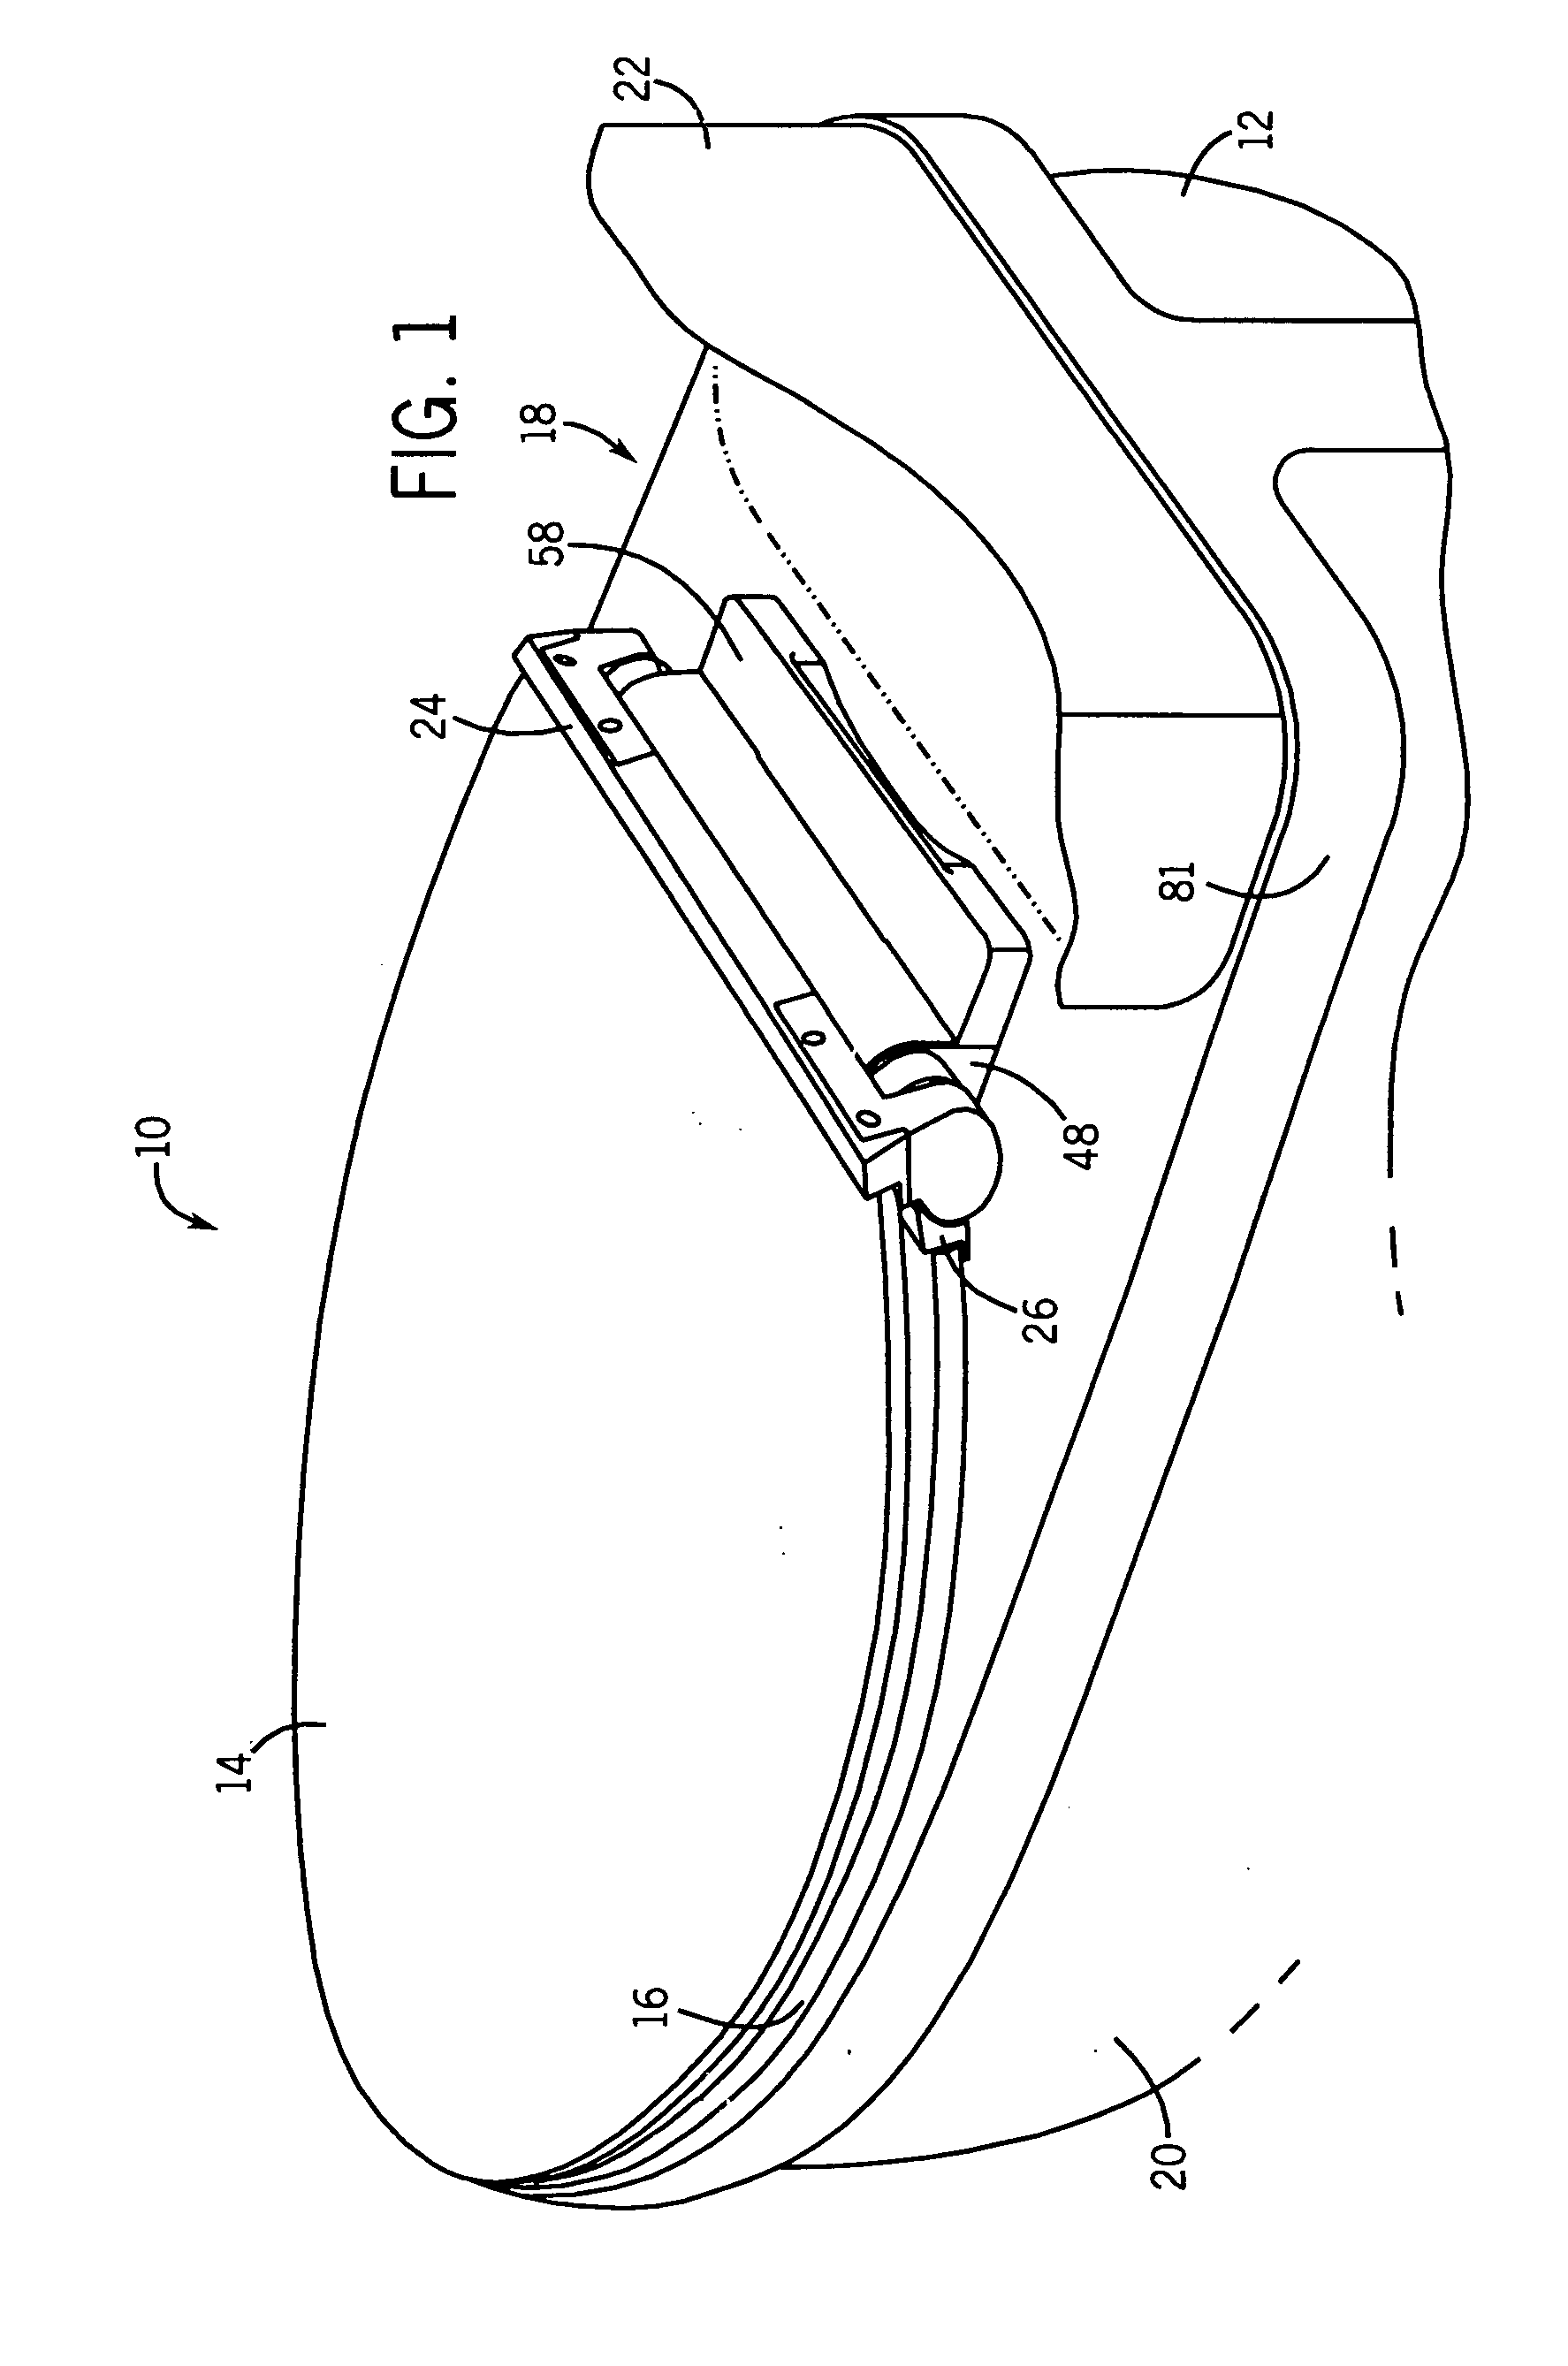 Releasable toilet seat assembly